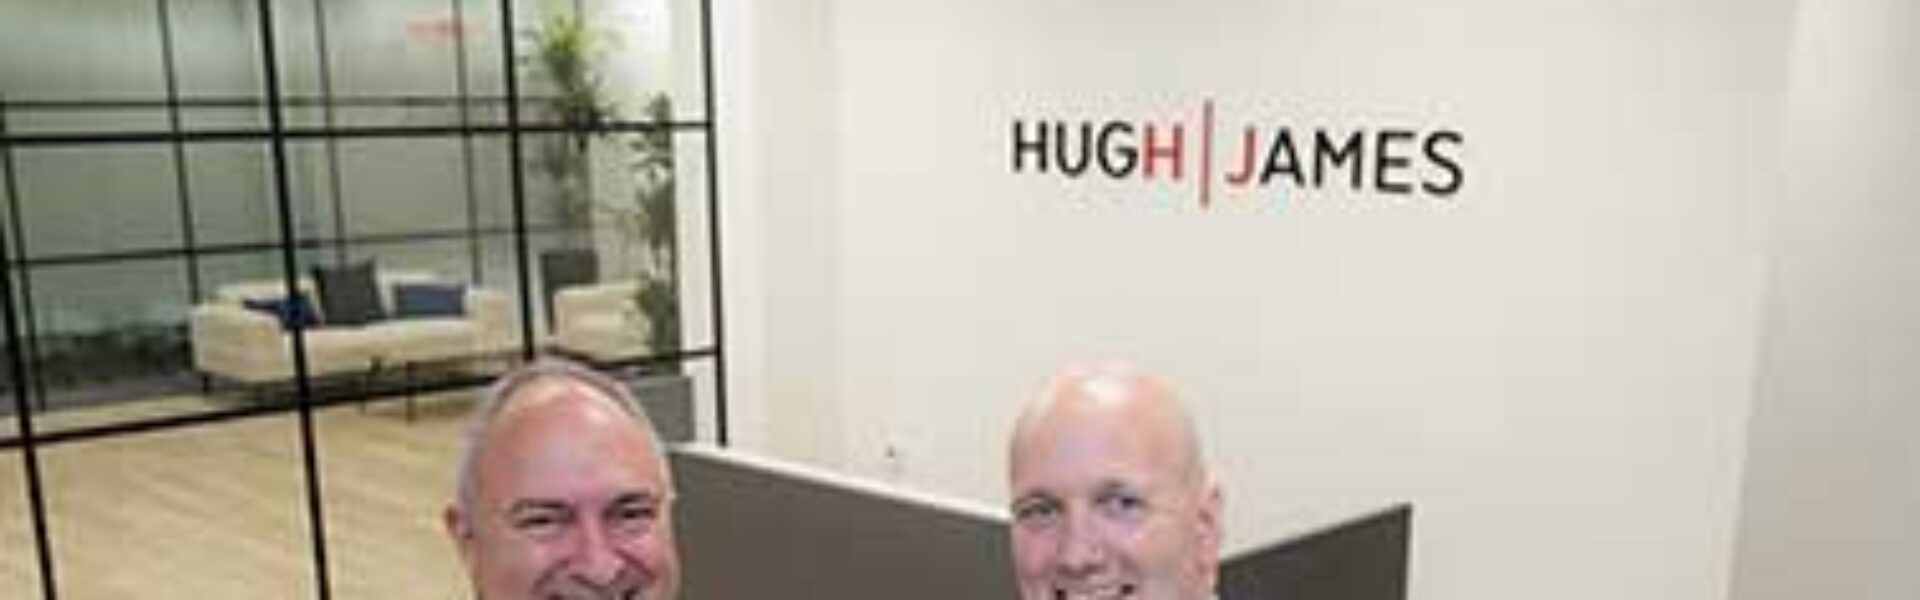 Mark Harvey and Alun Jones officially mark the opening of the new HJ London office at 1 King's Arms Yard.